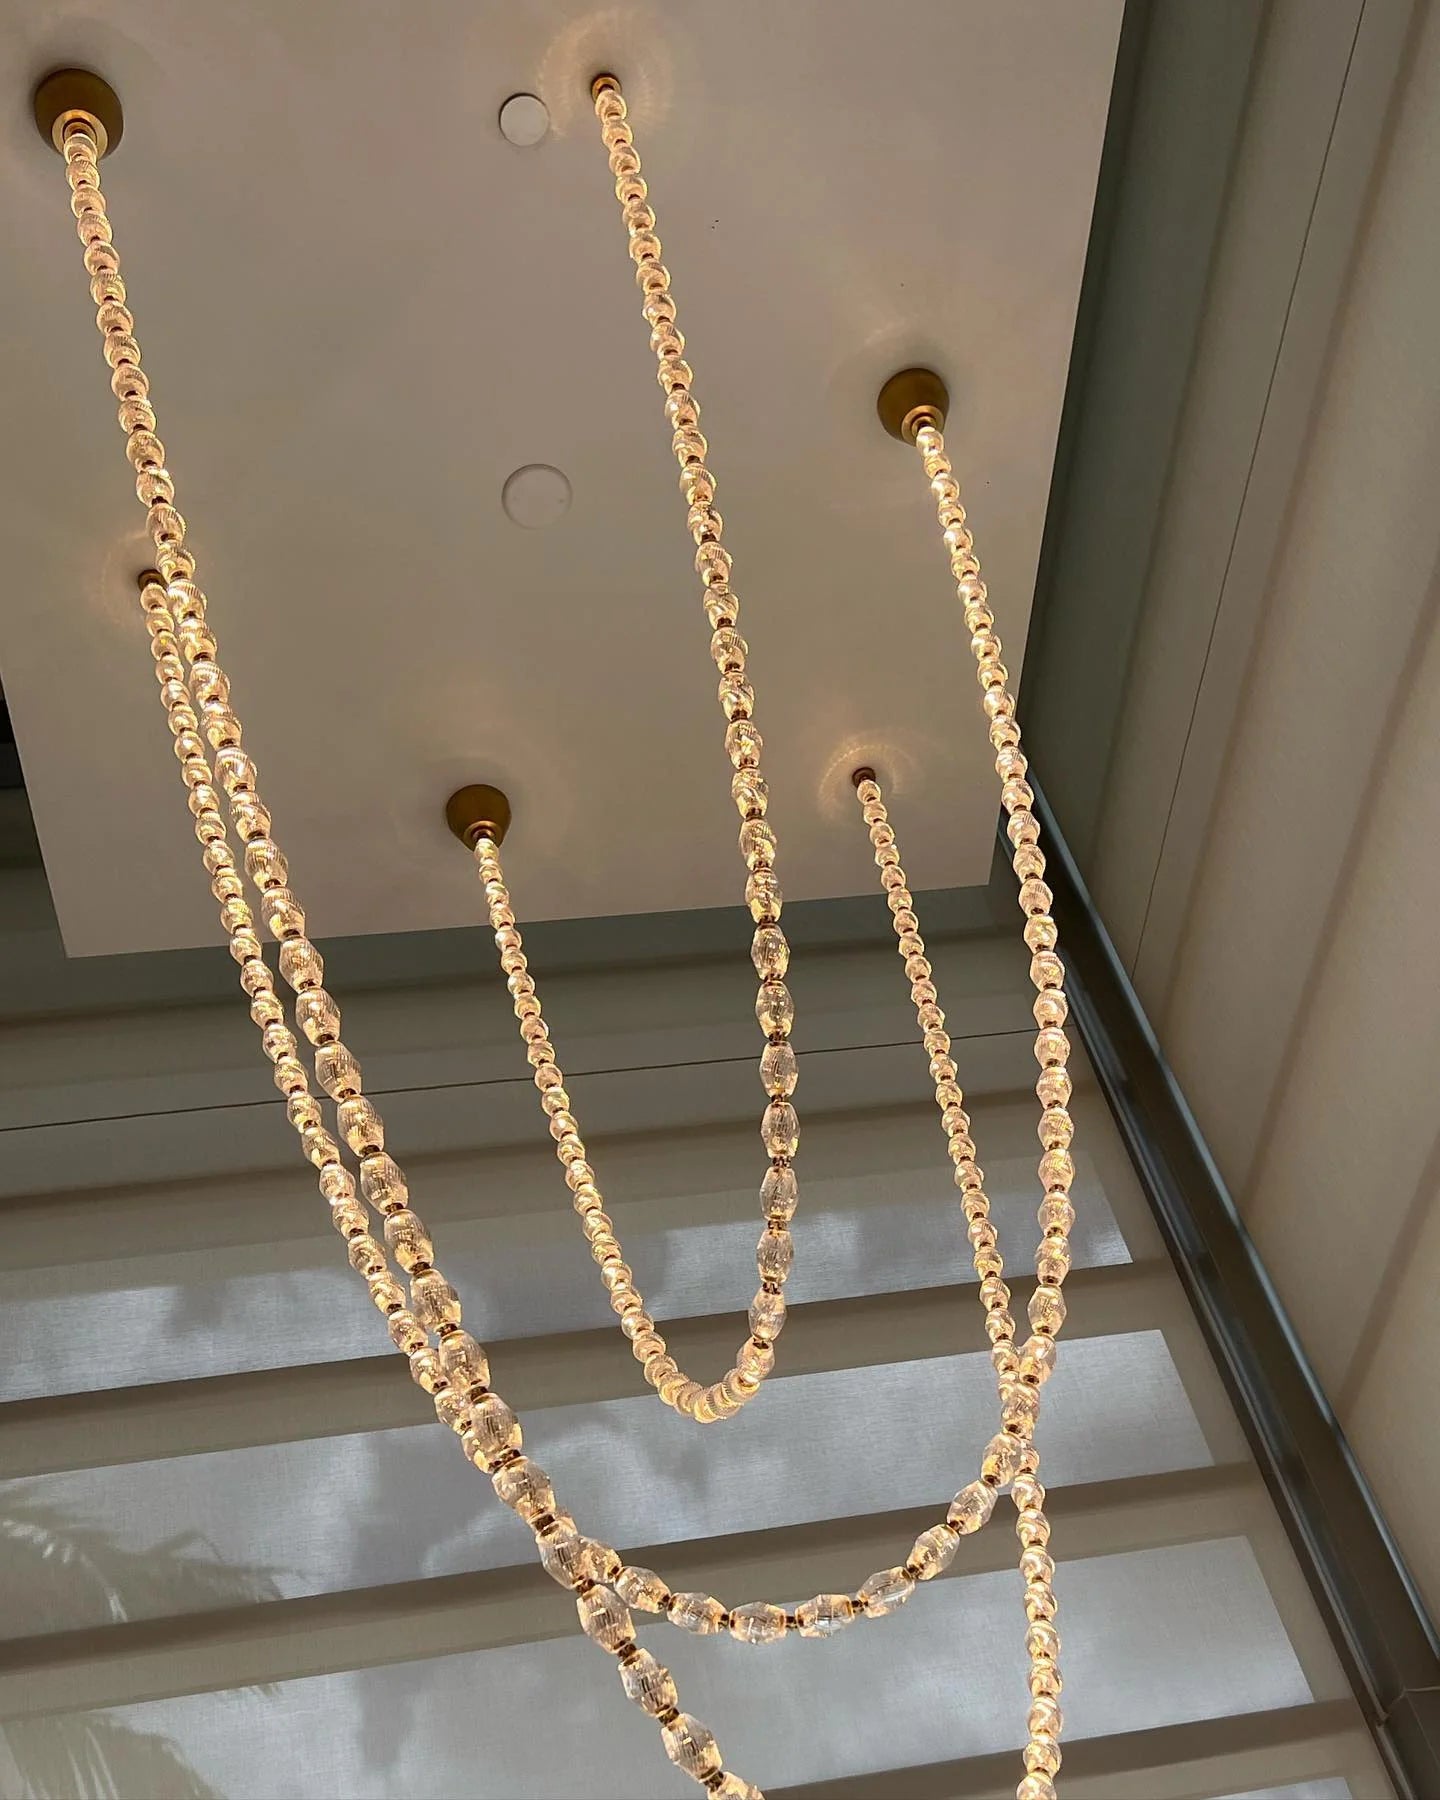 Creative Glass Pearl Necklace Pendant Chandelier for Living/Dining Room/Staircase